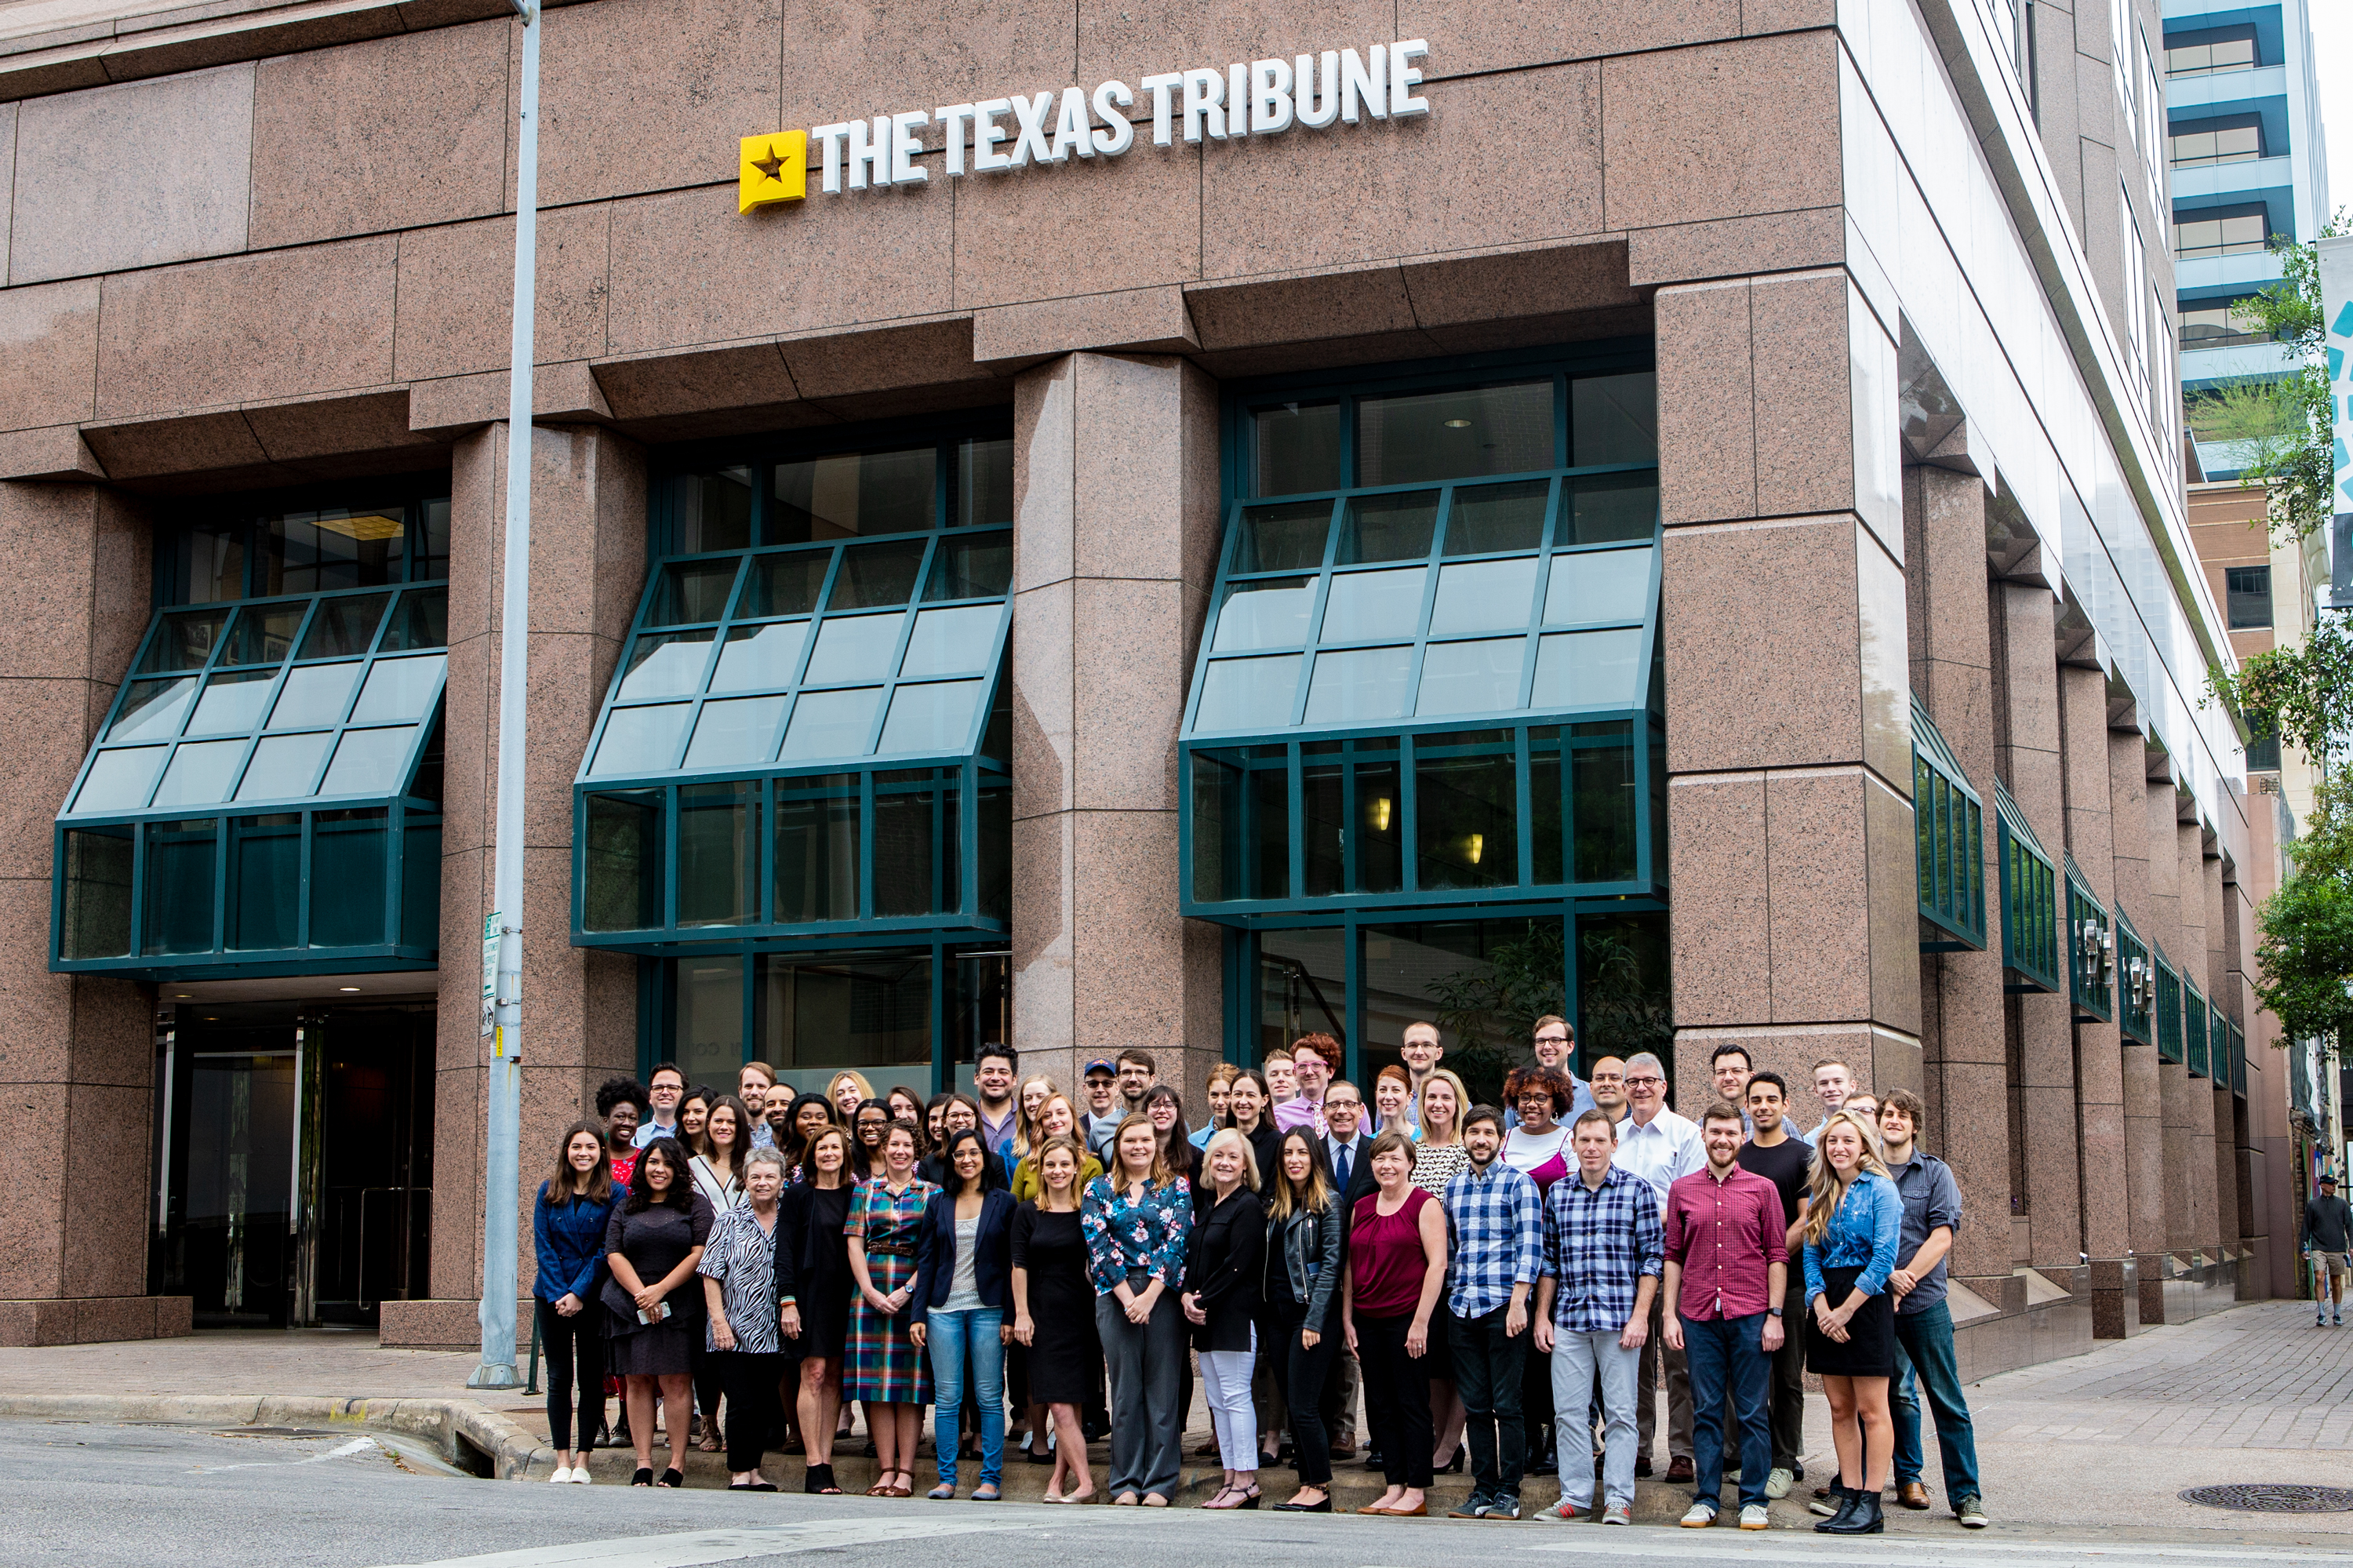 Members of the Texas Tribune staff stand together in front their headquarters.